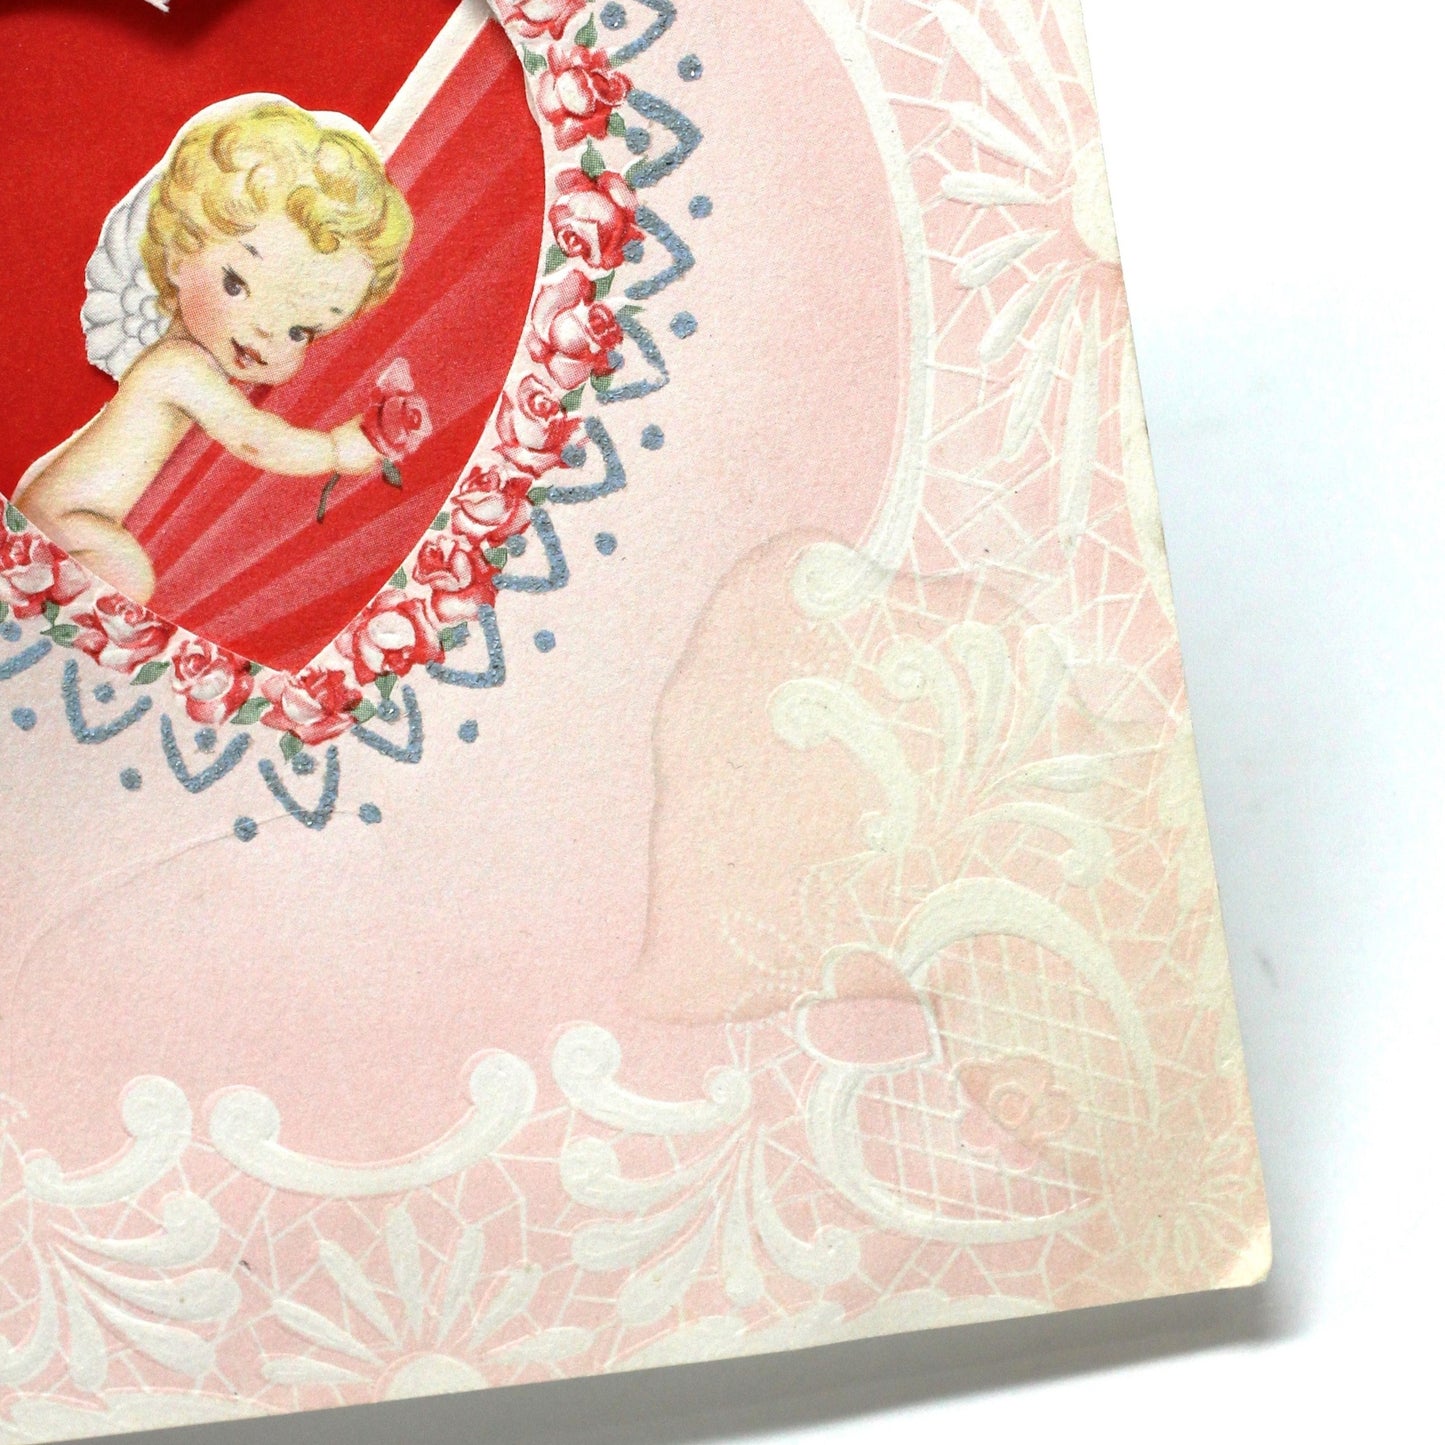 Greeting Card / Valentine Card, GB Golden Bell, Pop Up Cupid in Heart, Vintage